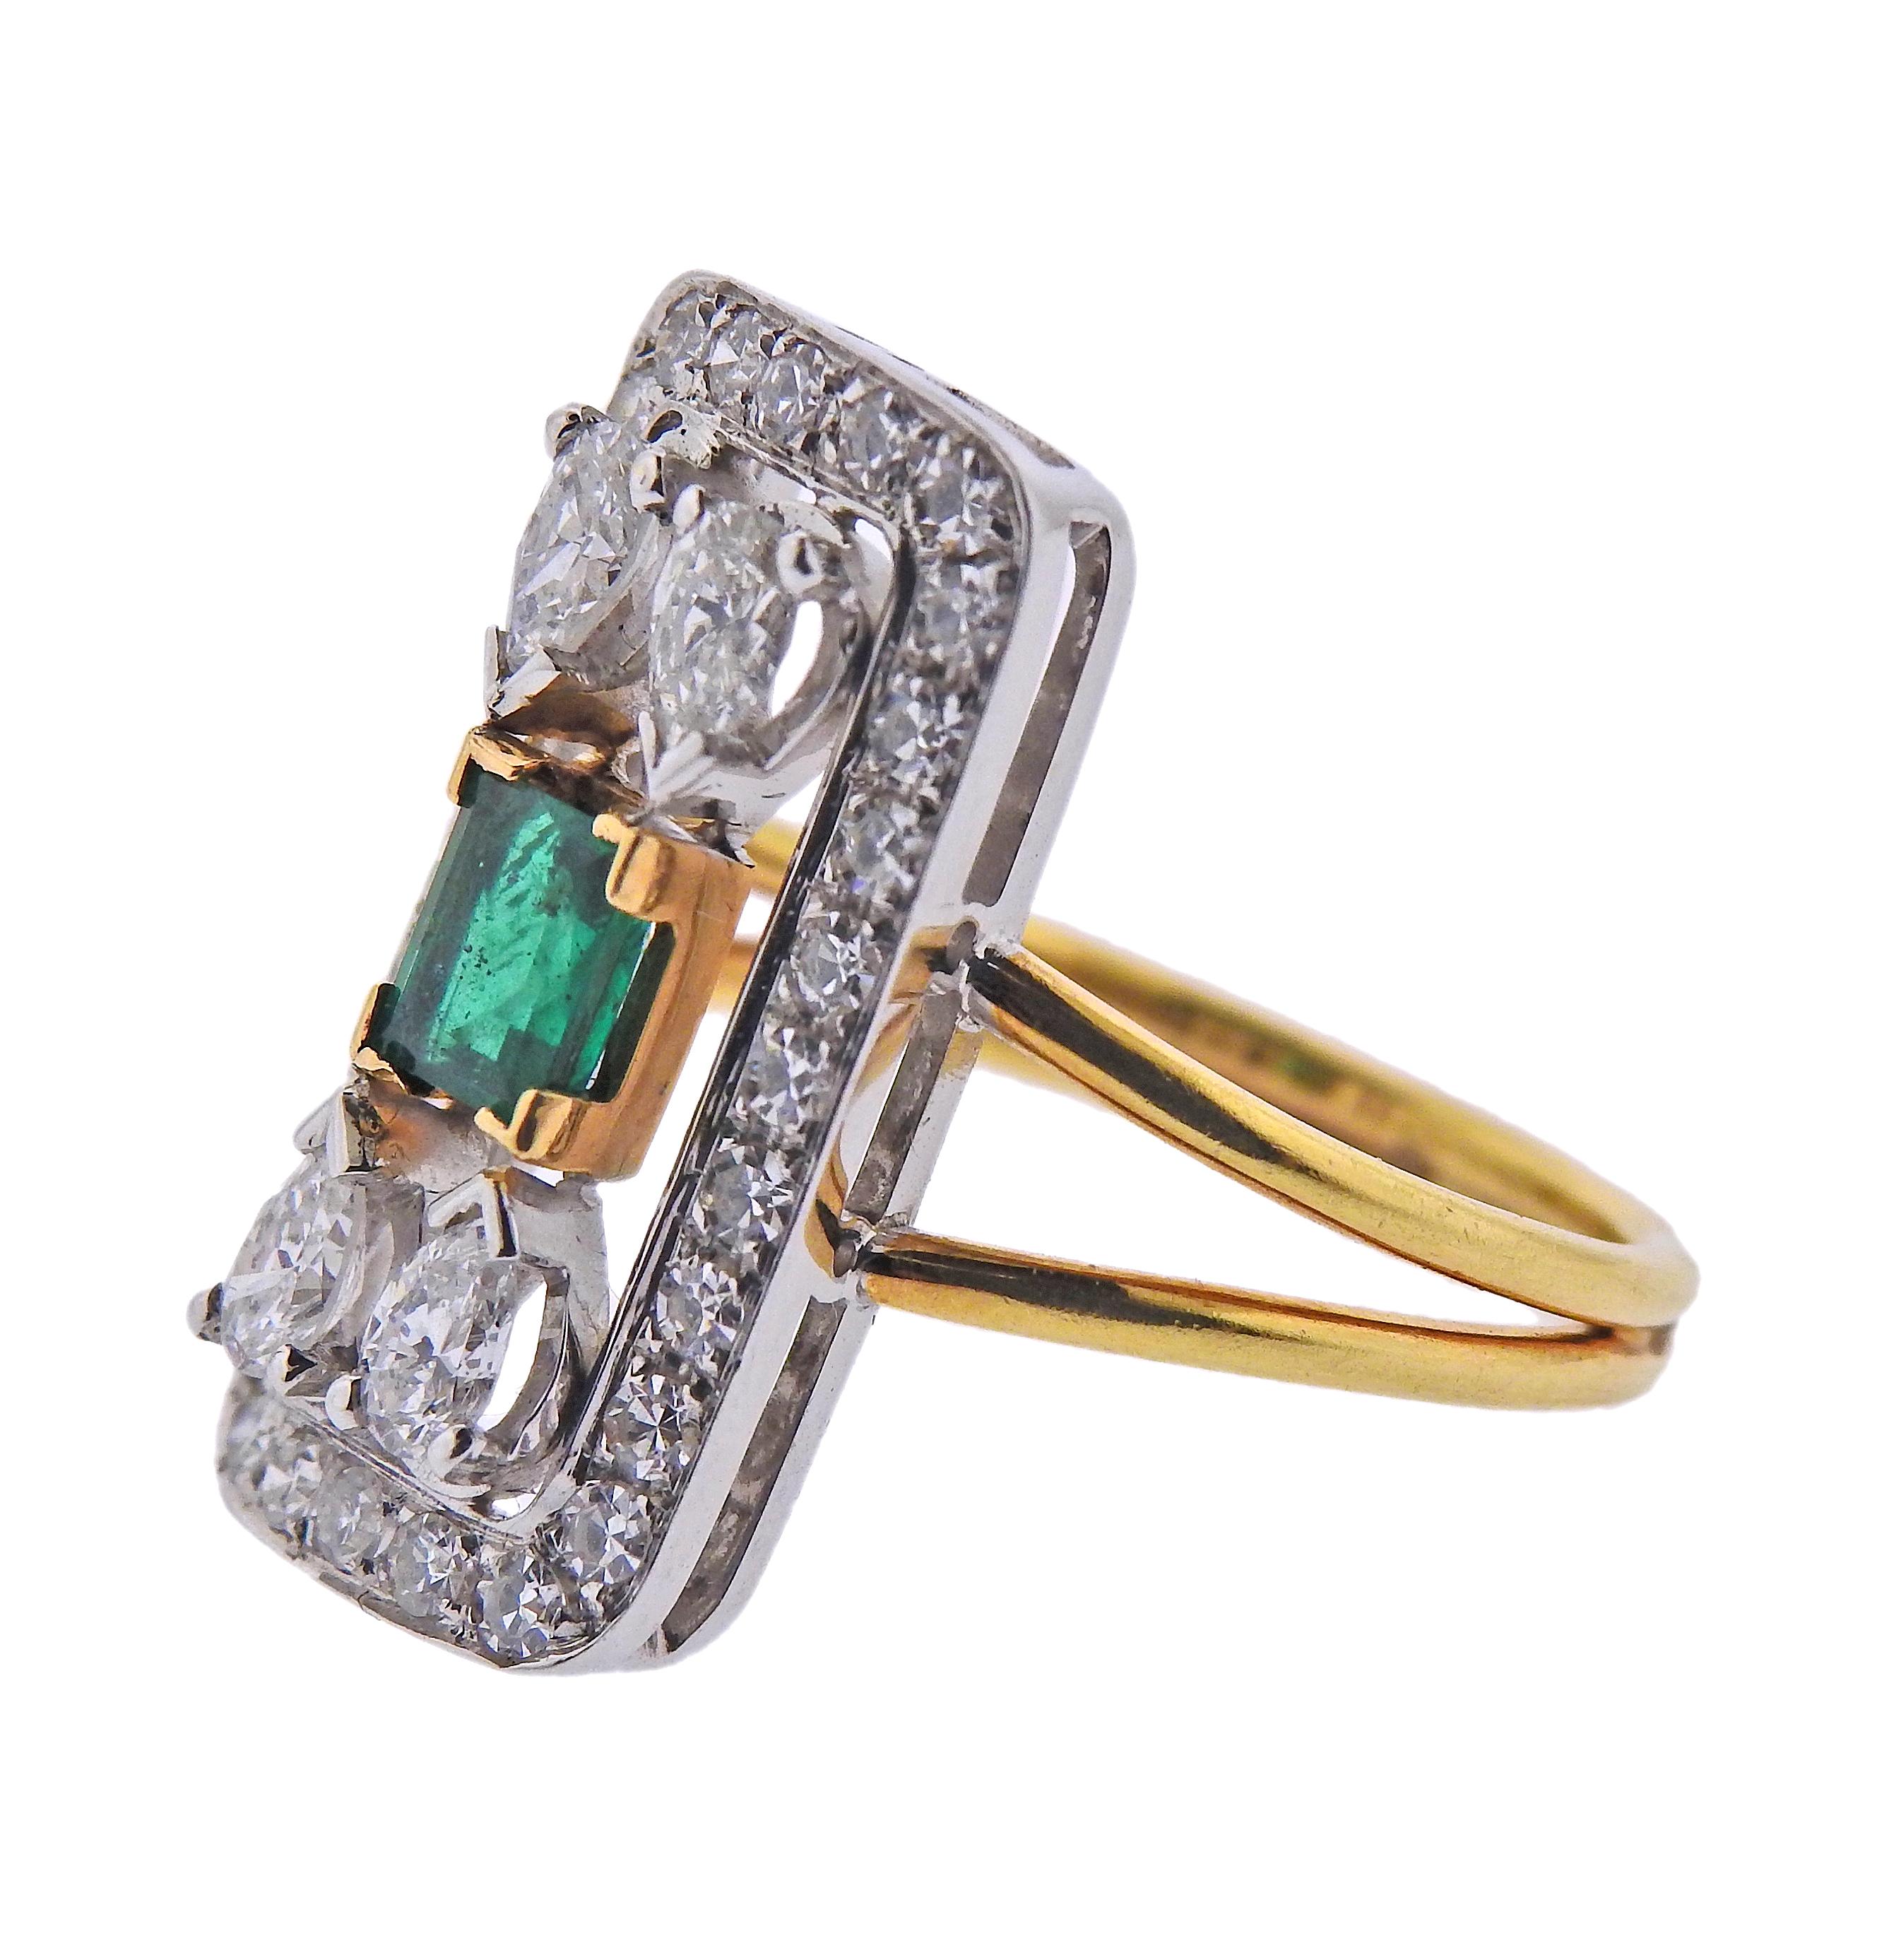 18k white and yellow gold ring, with once center 5 x 4.15mm emerald, surrounded with pearl and round cut diamonds - total approx. 1.00ctw in diamonds. Ring size - 6, ring top - 21mm x 11mm. Weight - 5.4 grams.